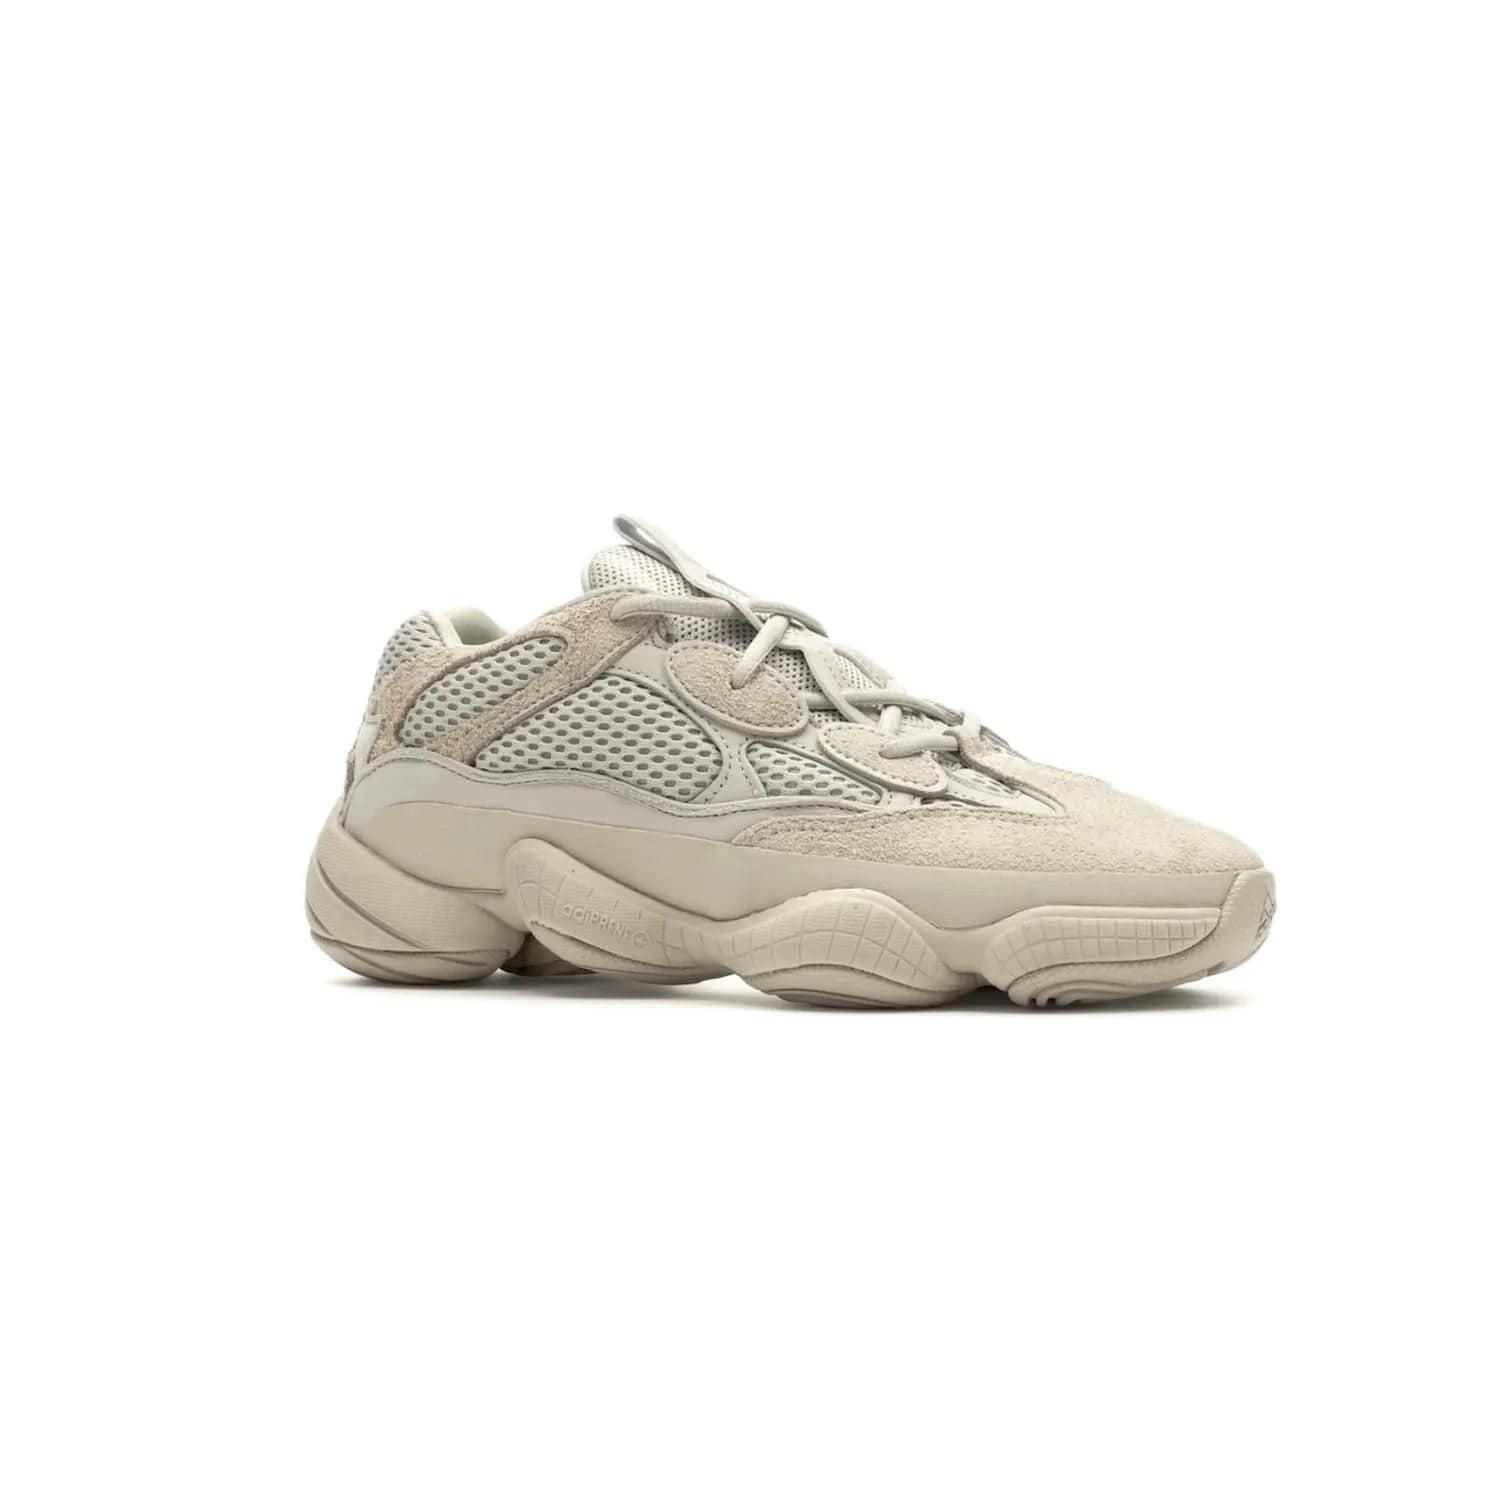 adidas Yeezy 500 Blush - Image 3 - Only at www.BallersClubKickz.com - Step up your sneaker game with the Adidas Yeezy 500 Blush. Monochromatic pale pink palette, hiking-inspired suede/mesh construction, plus adiPRENE sole for comfort and performance. Get the Adidas Yeezy 500 and experience true style and comfort.